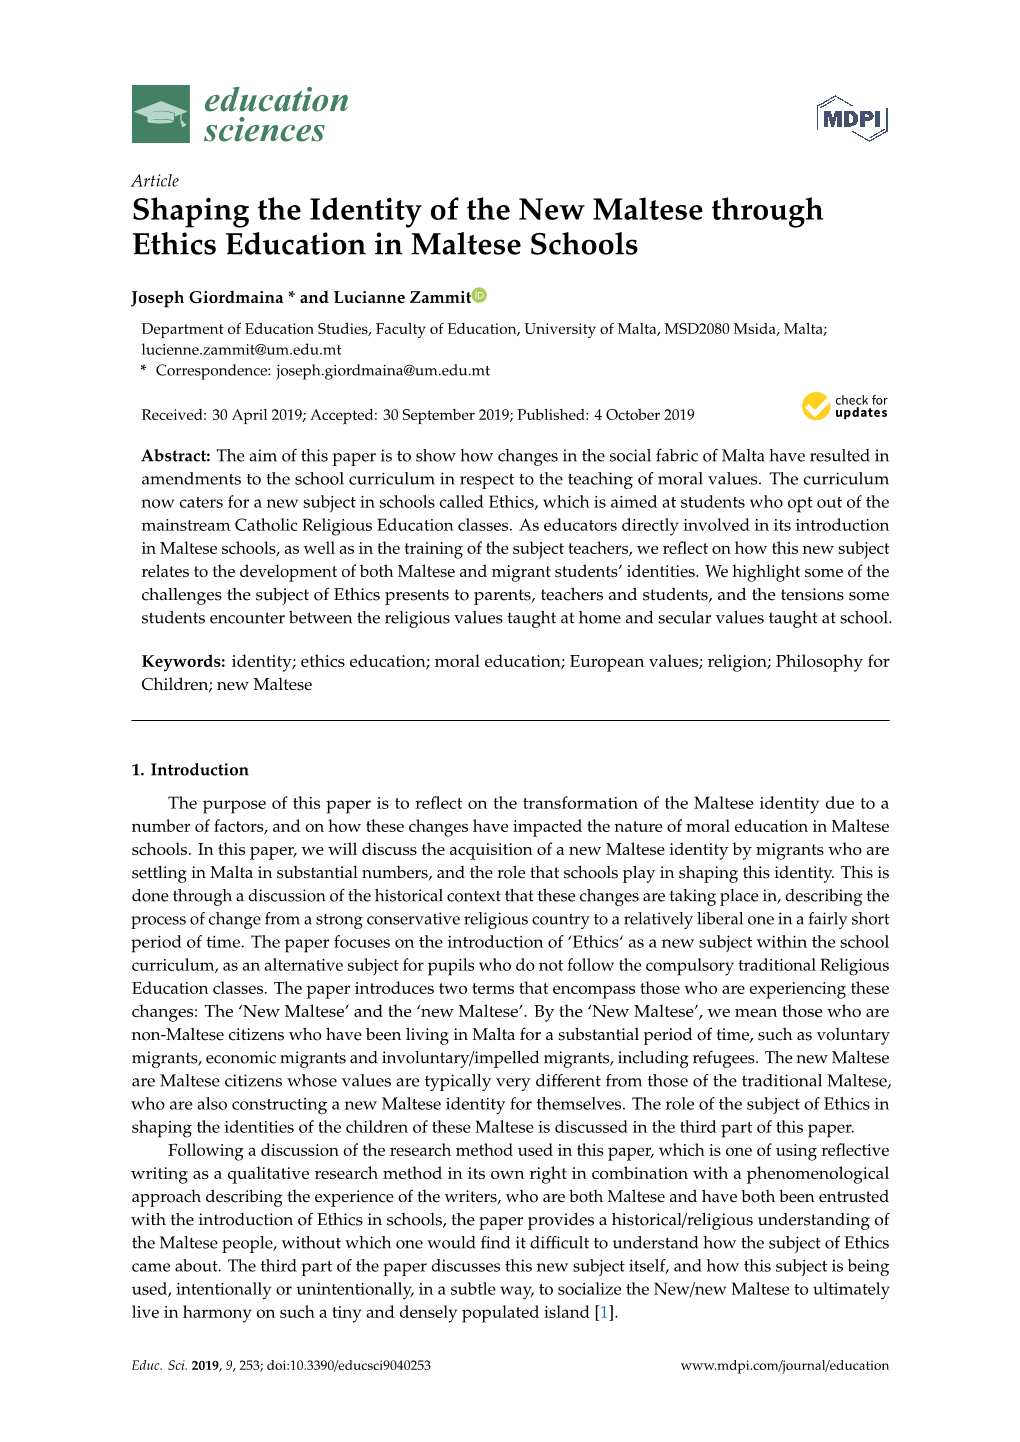 Shaping the Identity of the New Maltese Through Ethics Education in Maltese Schools